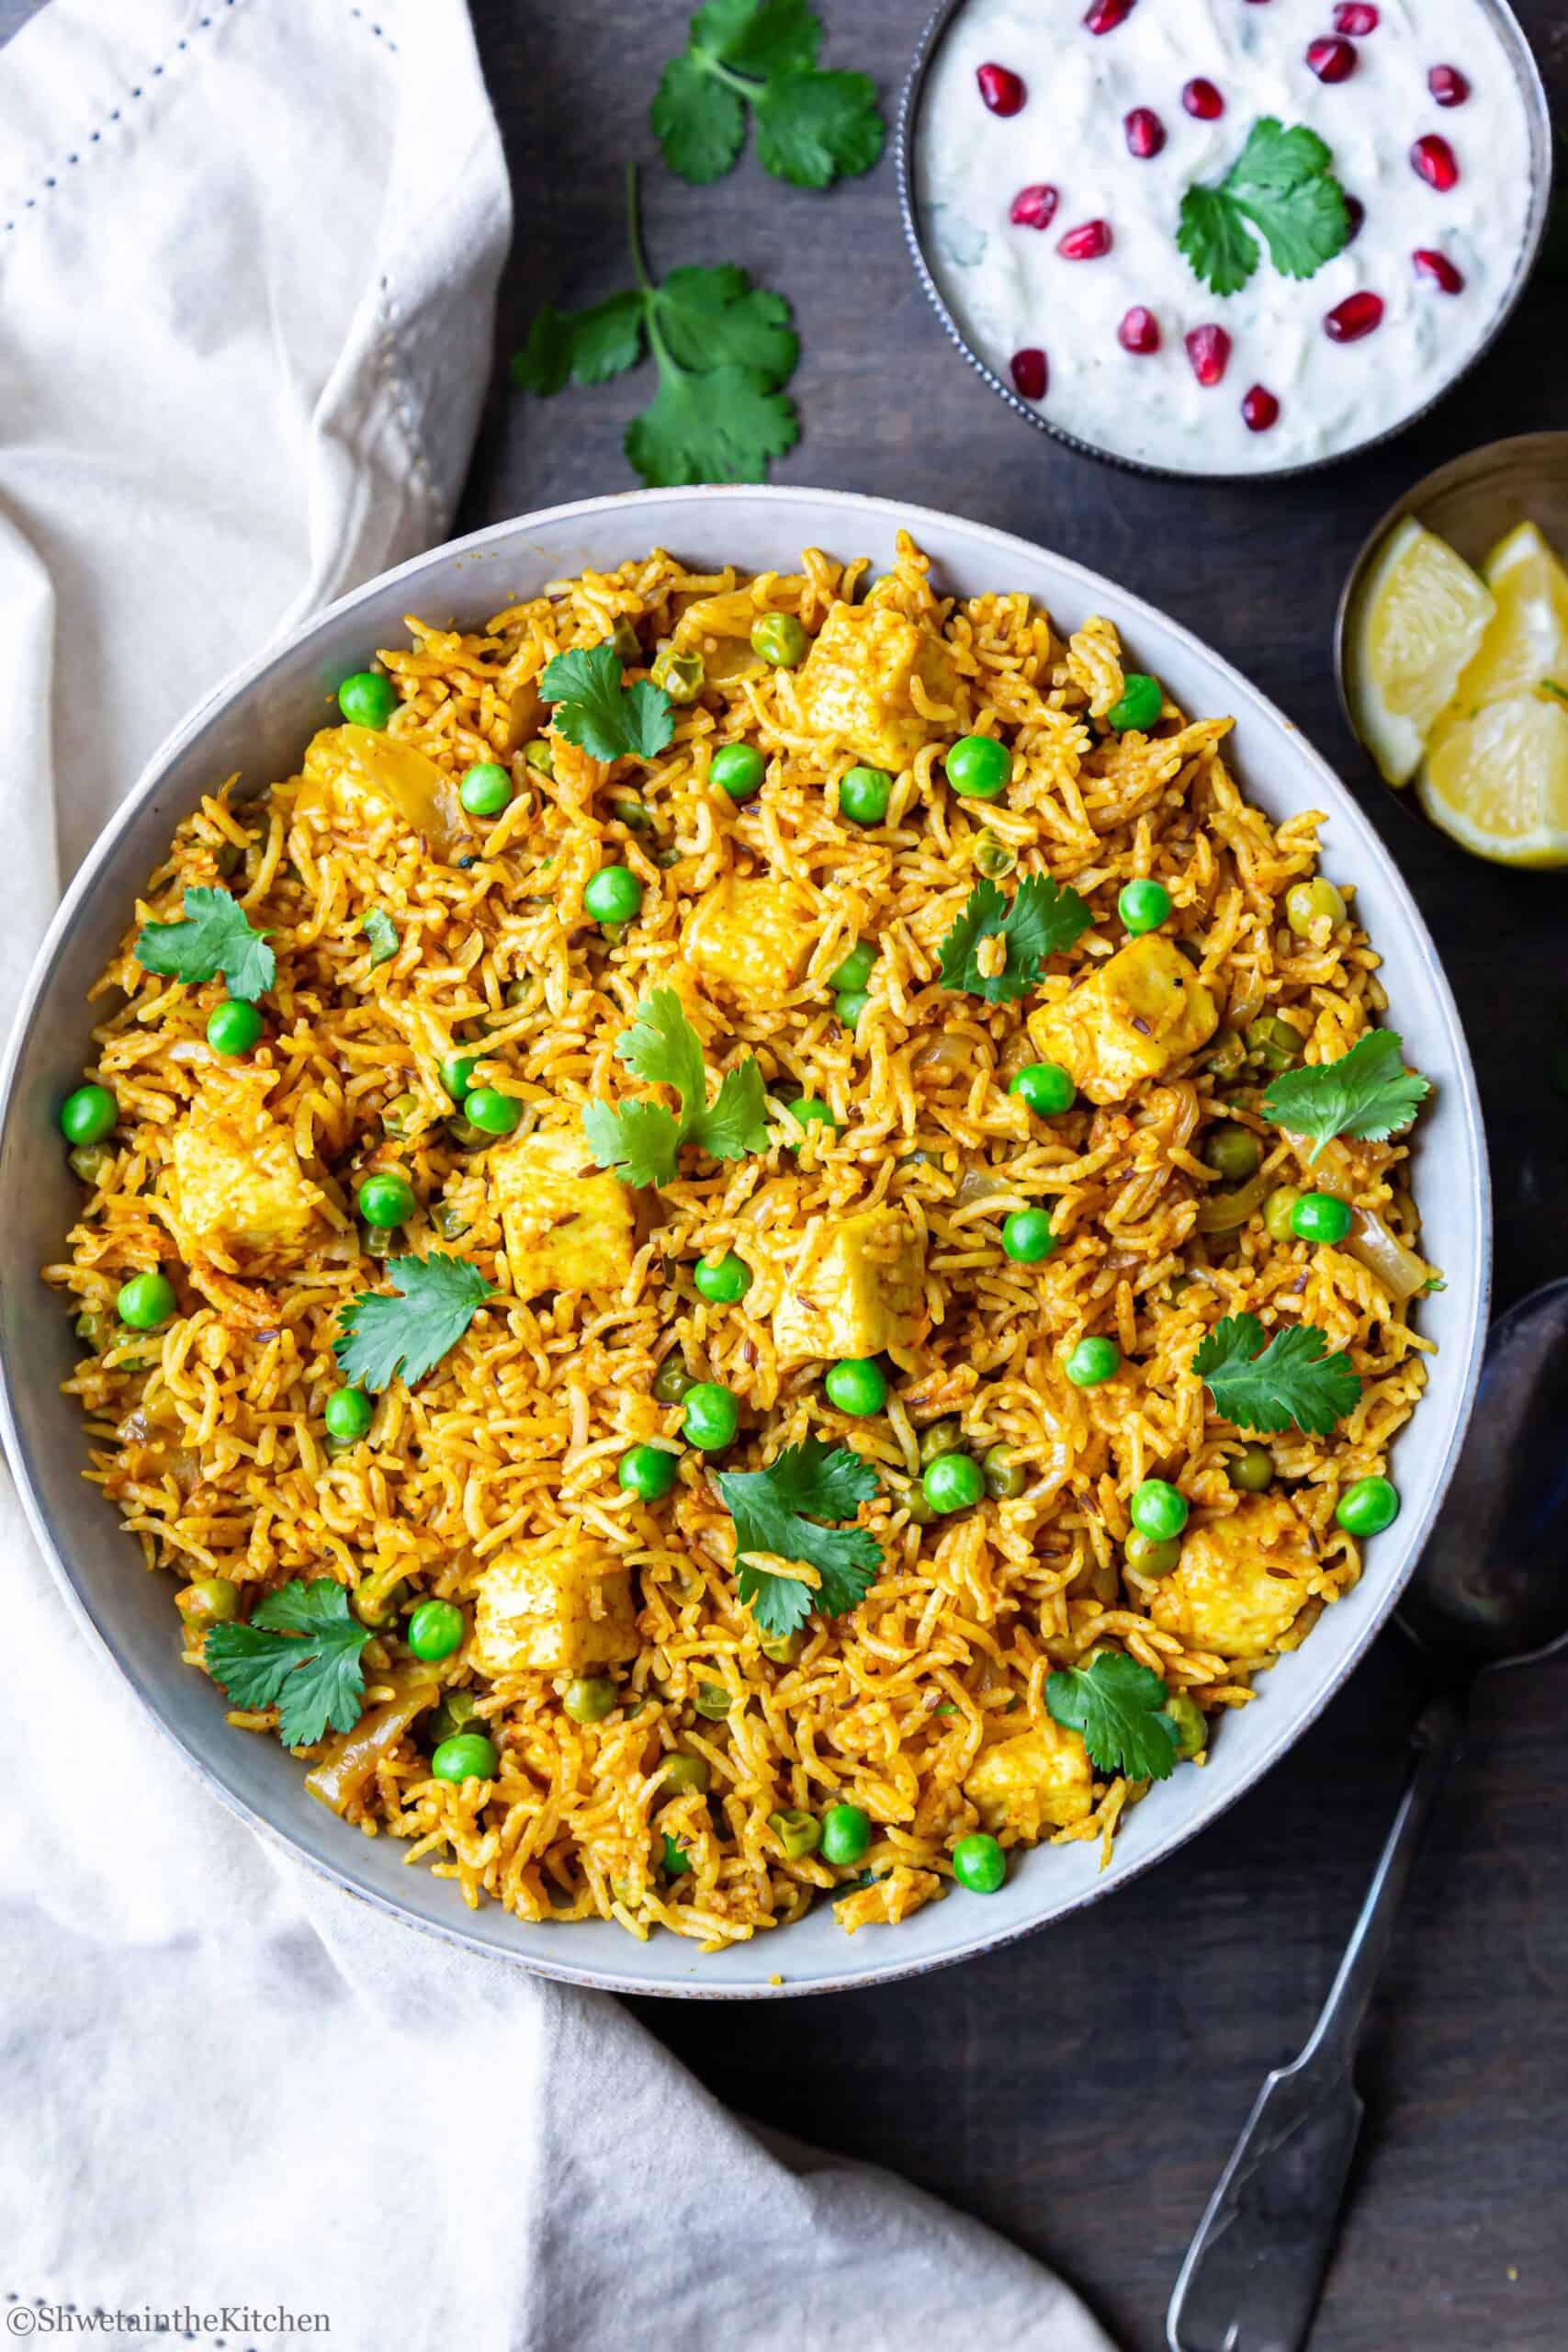 12 Indian Food Instagram Accounts Every Foodie Should Follow